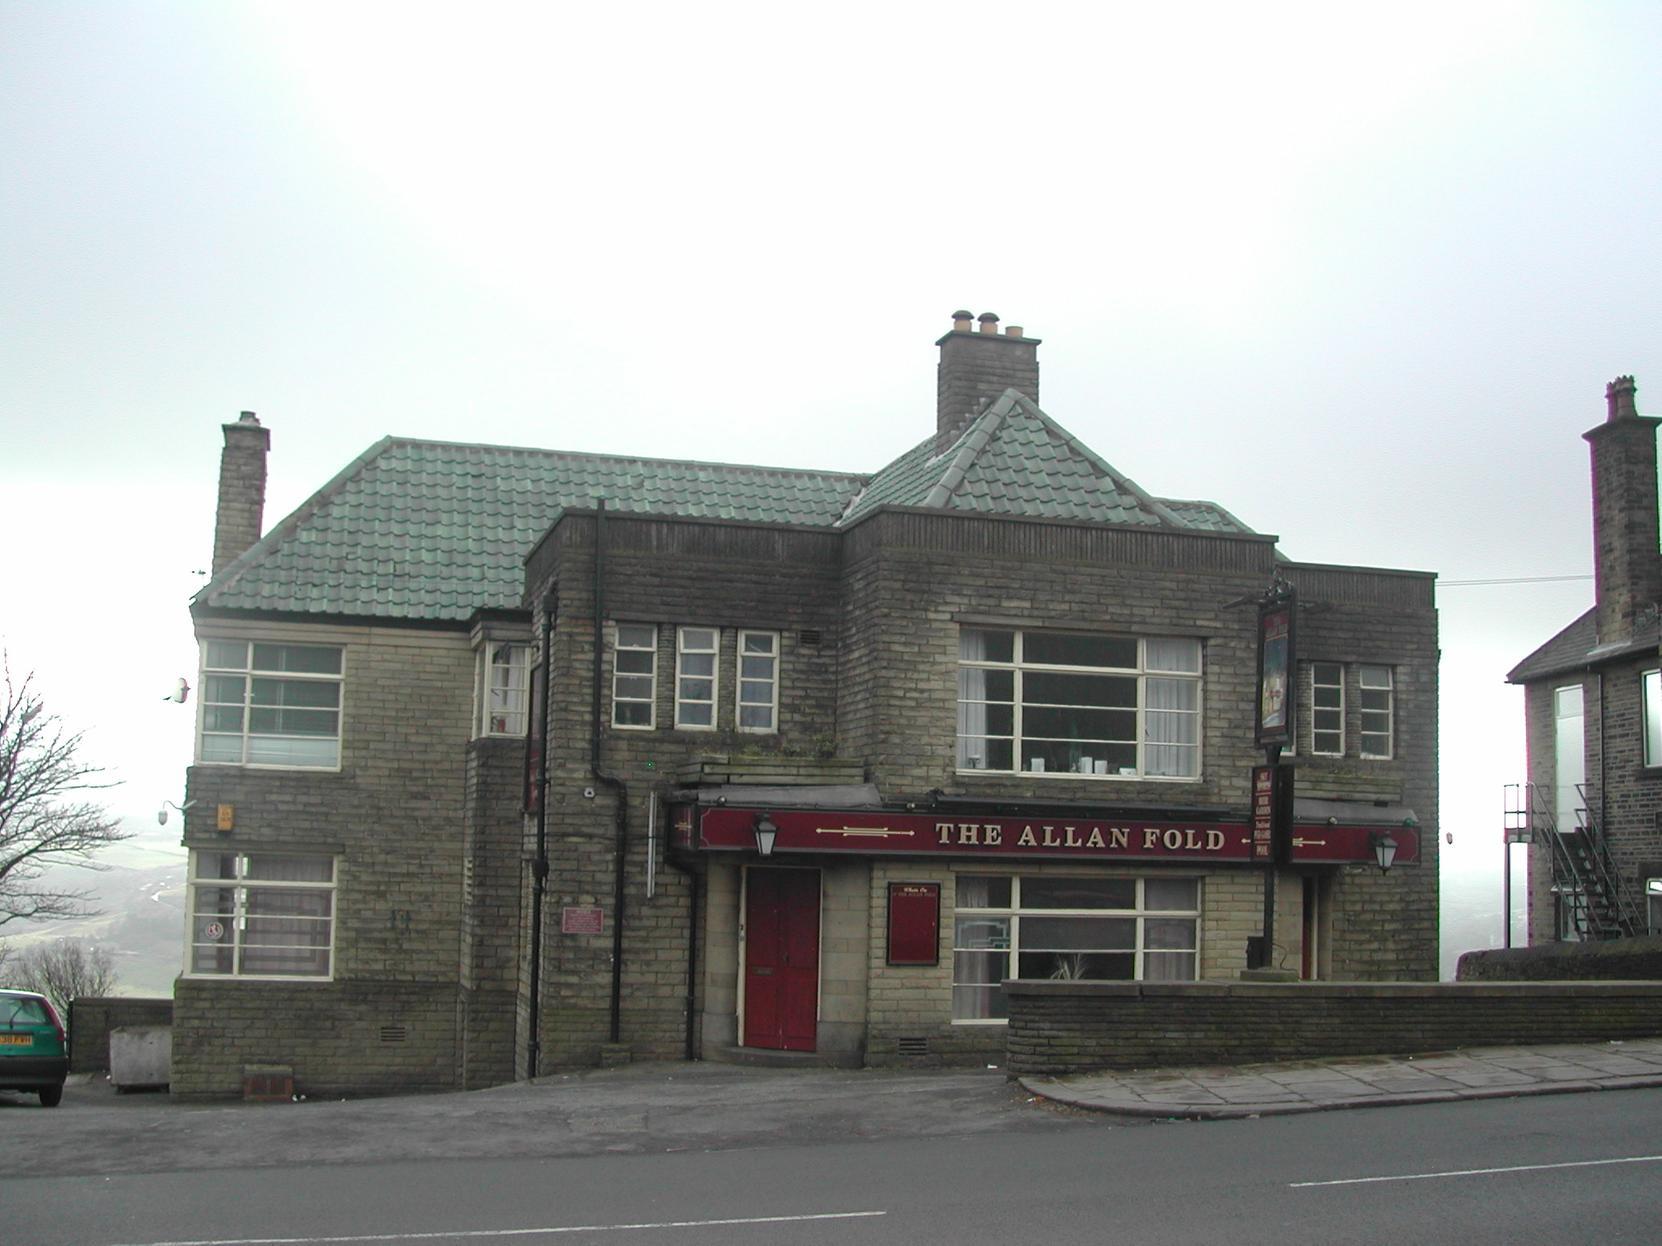 A familiar sight along Warley Road for many years, the Allan Fold, was built as a flagship pub for the towns former Websters Brewery. The venue is now Italian restaurant Pollino.